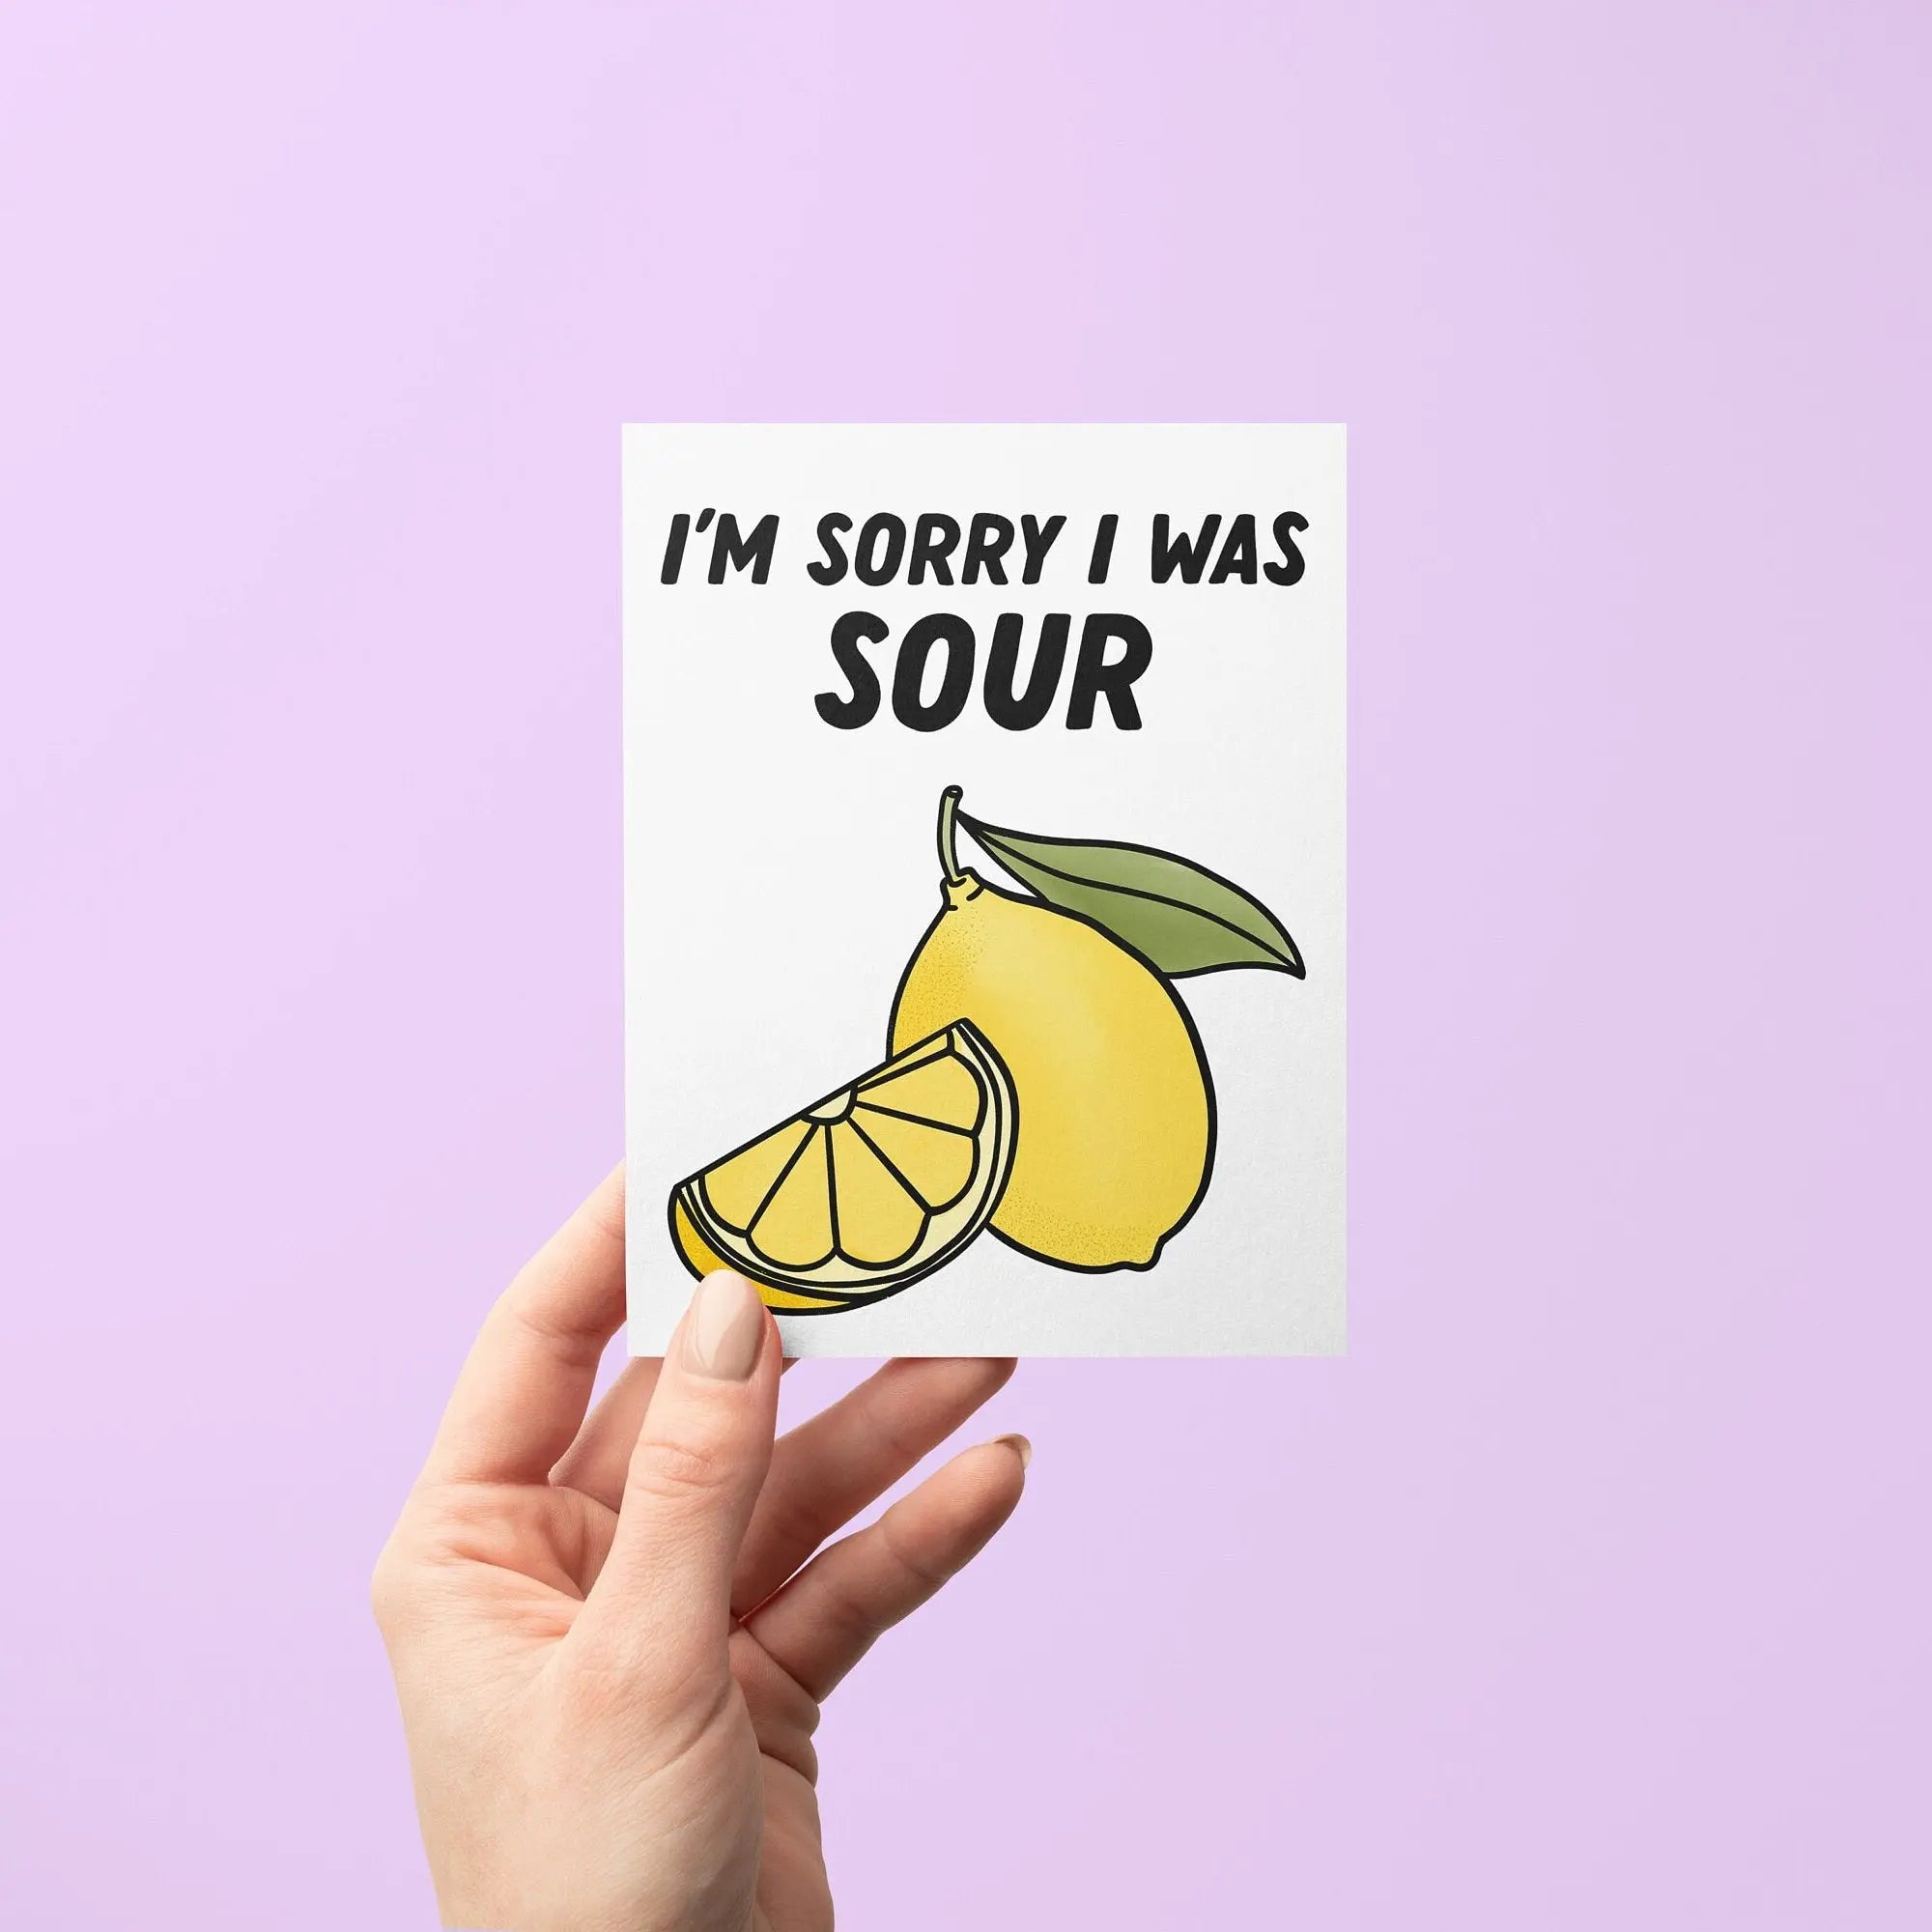 Sorry I was sour apology card MangoIllustrated